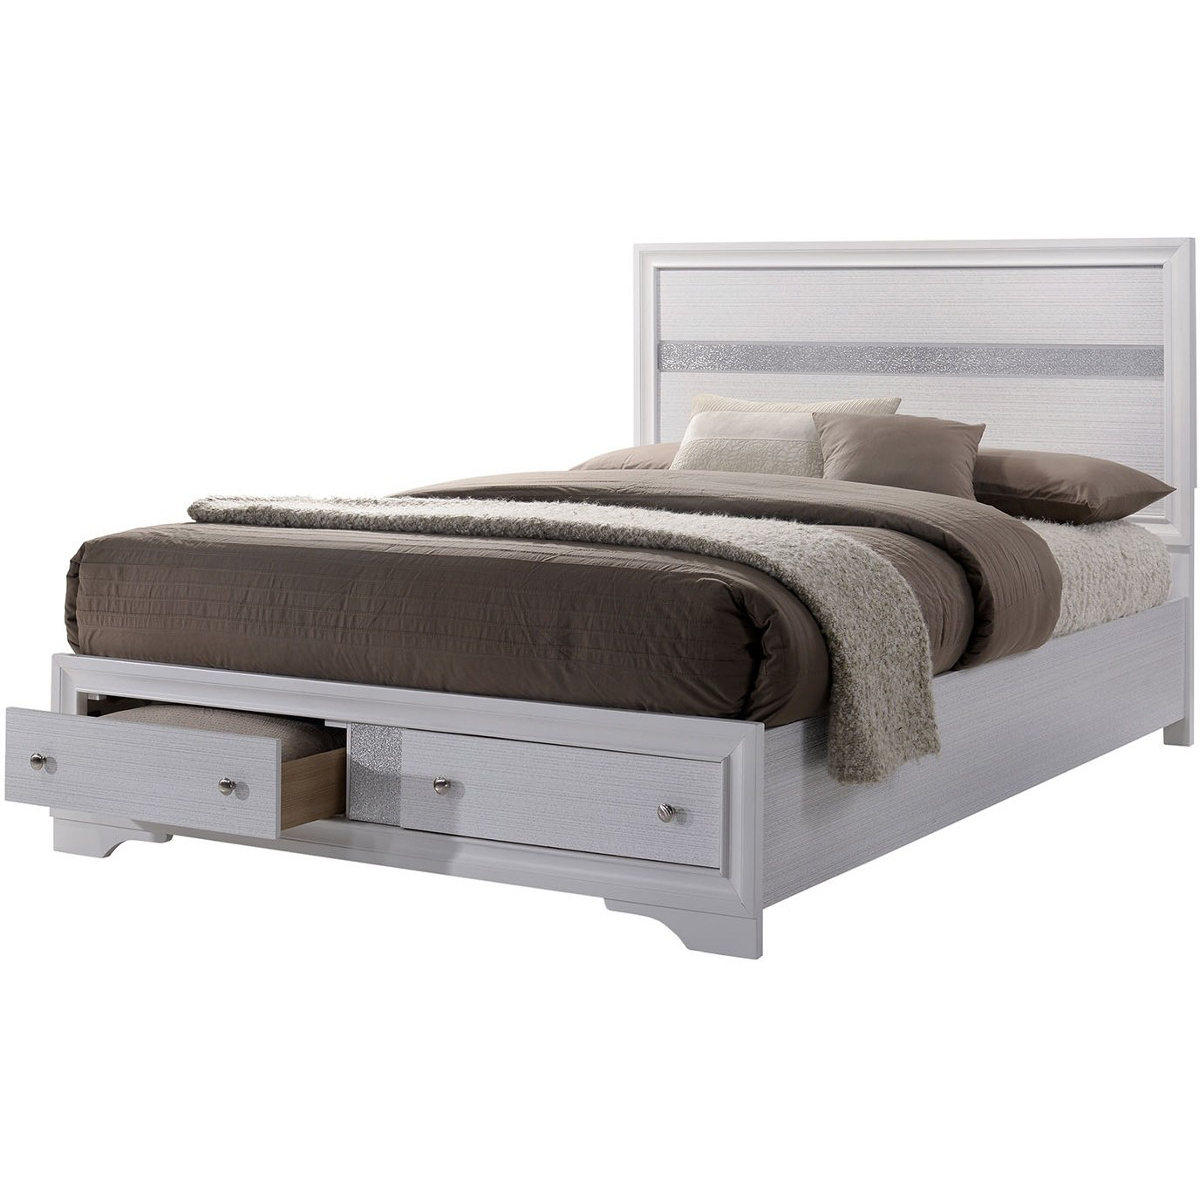 Panel Design Eastern King Bed With Silver Accents And Bracket Feet, White- Saltoro Sherpi